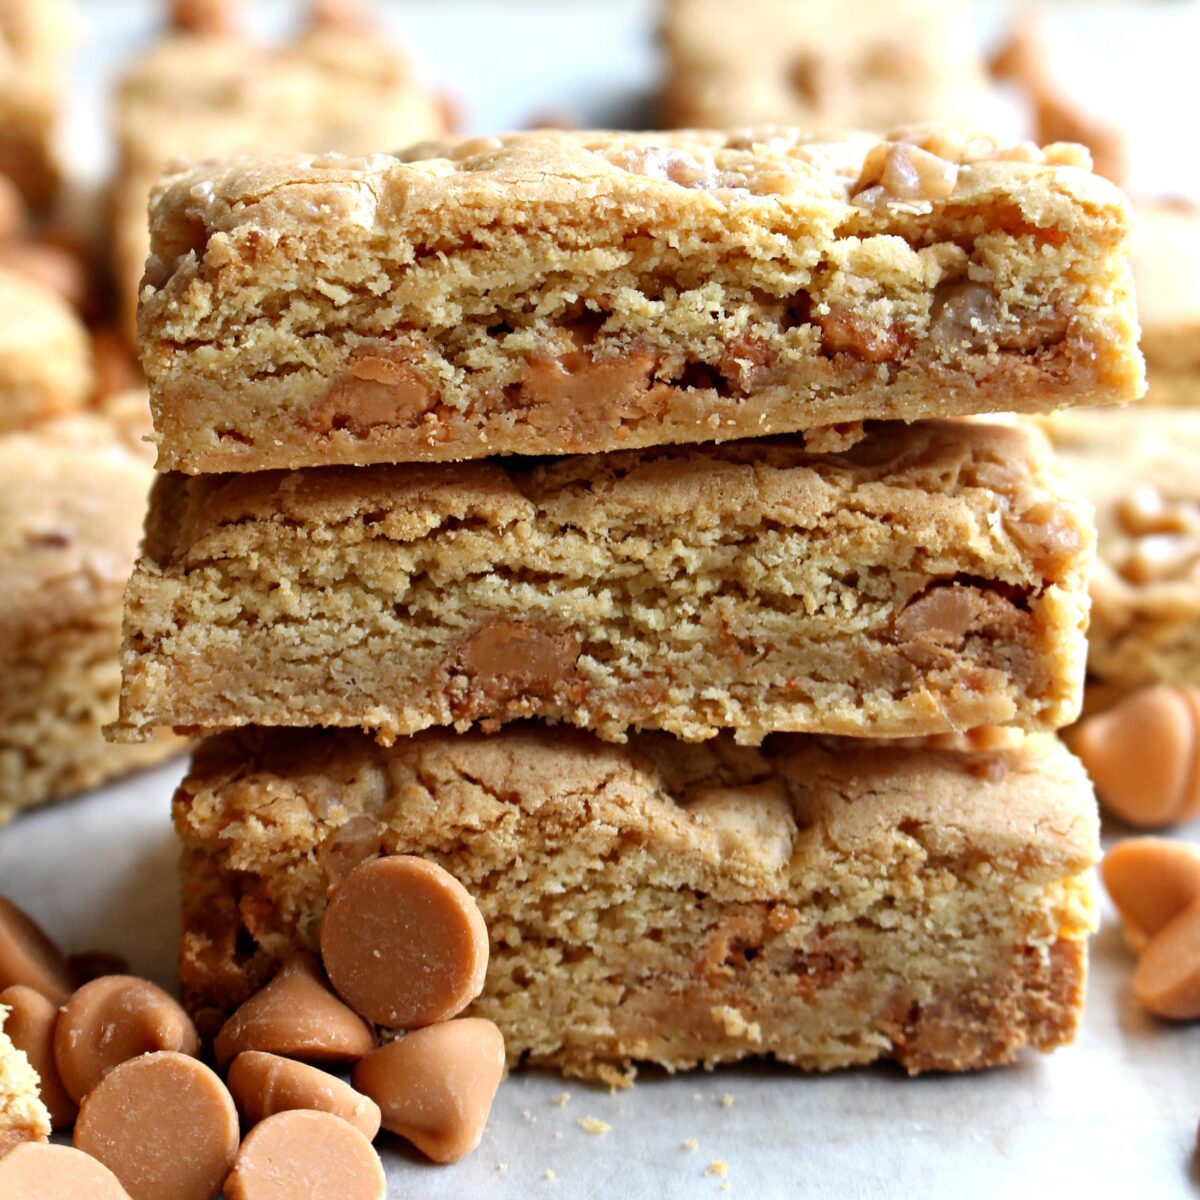 Stack of three butterscotch blondies showing the thick edges and chips inside.